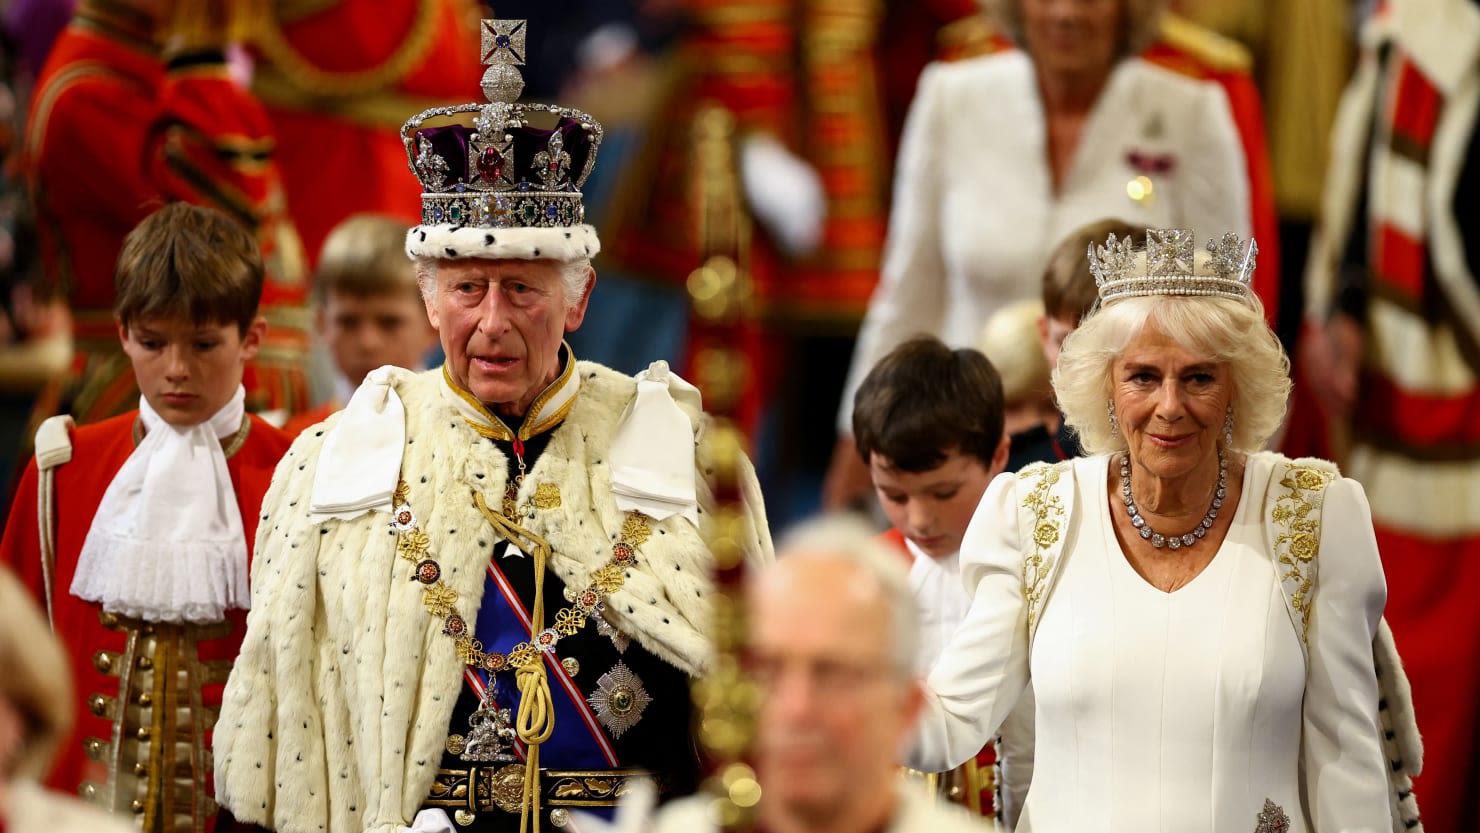 Charles Opens Parliament With Bonkers Medieval Customs